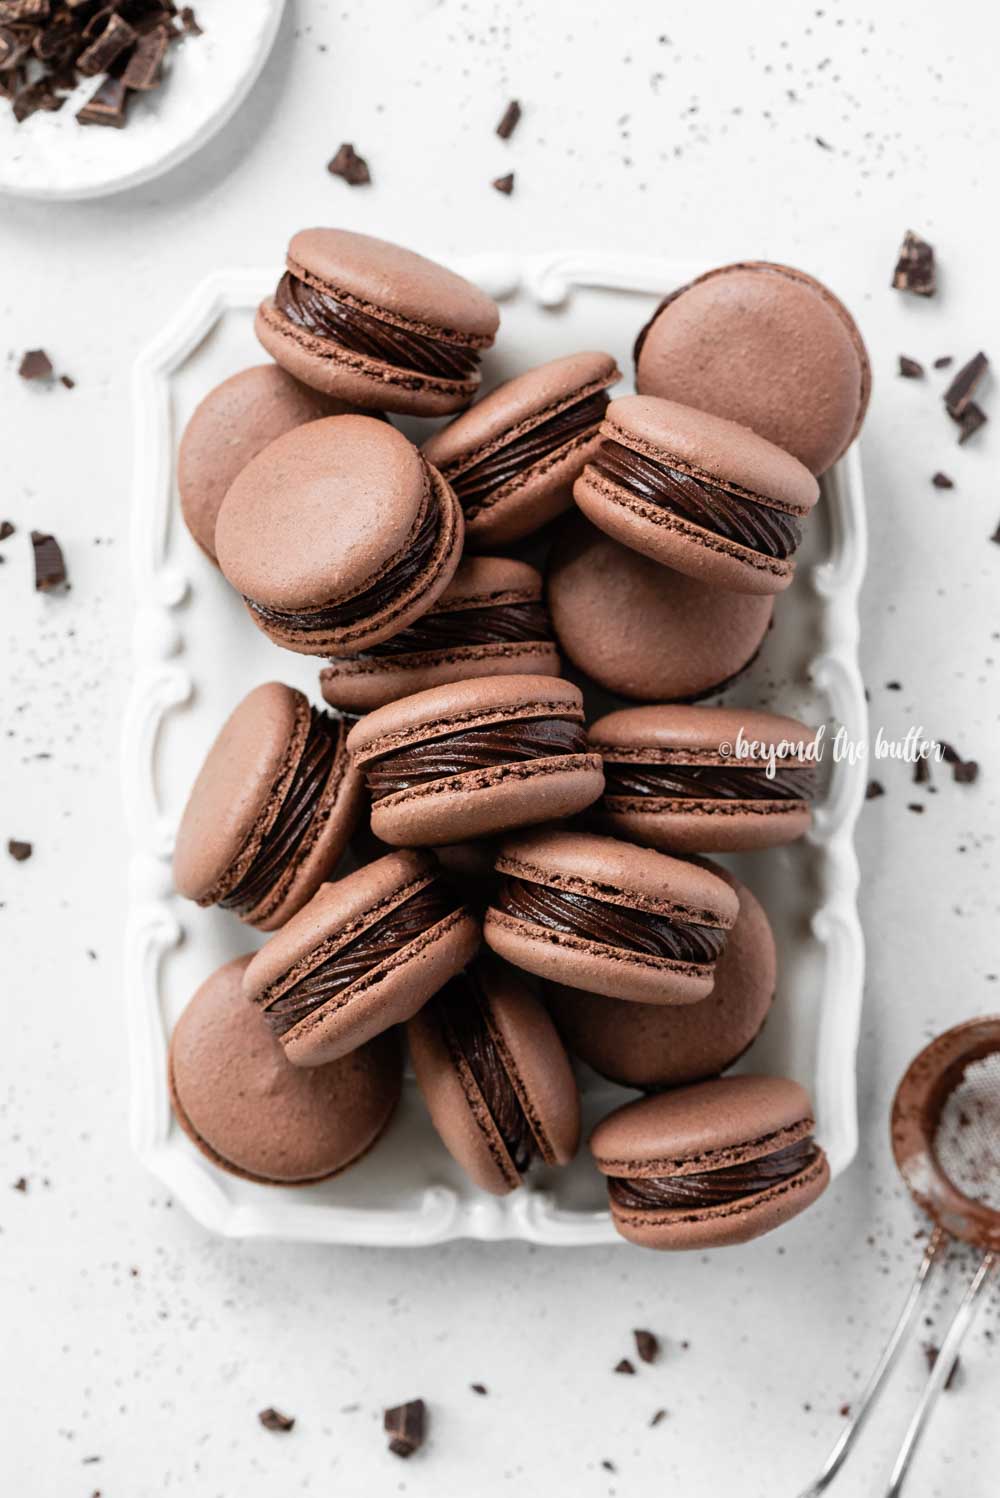 Plate full of dark chocolate macarons | All Images © Beyond the Butter™